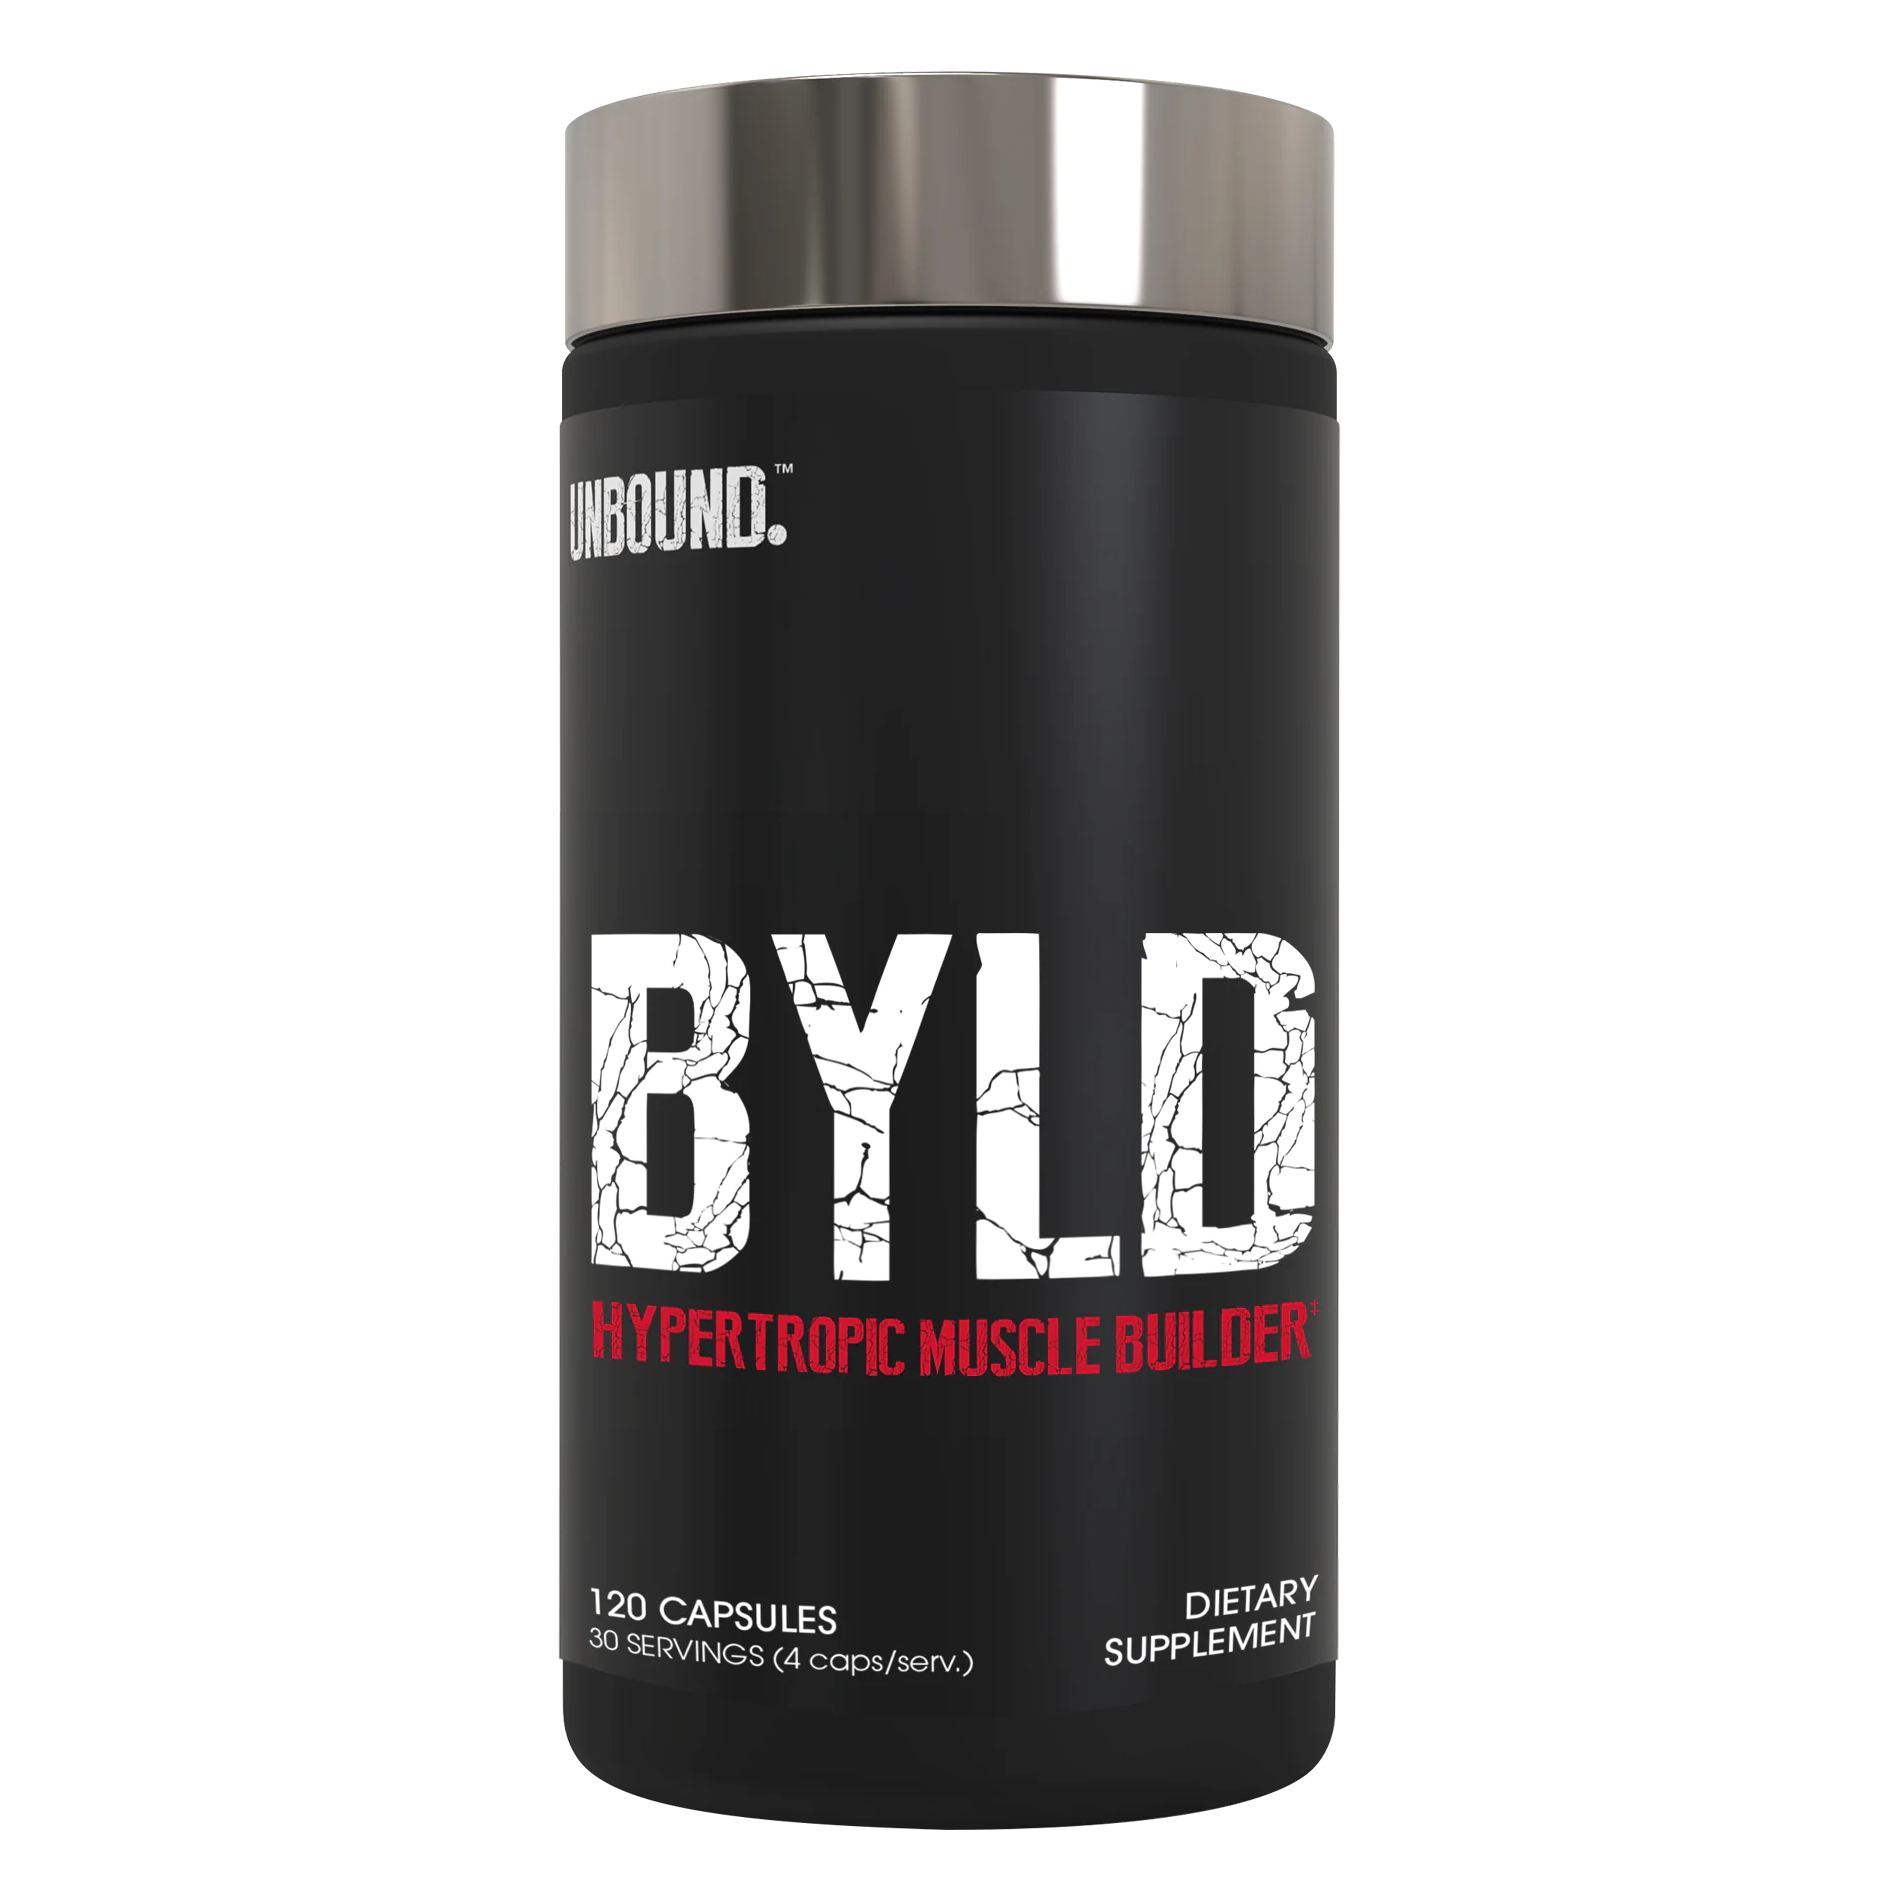 Unbound BYLD Hypertropic Muscle Builder 120 Capsules